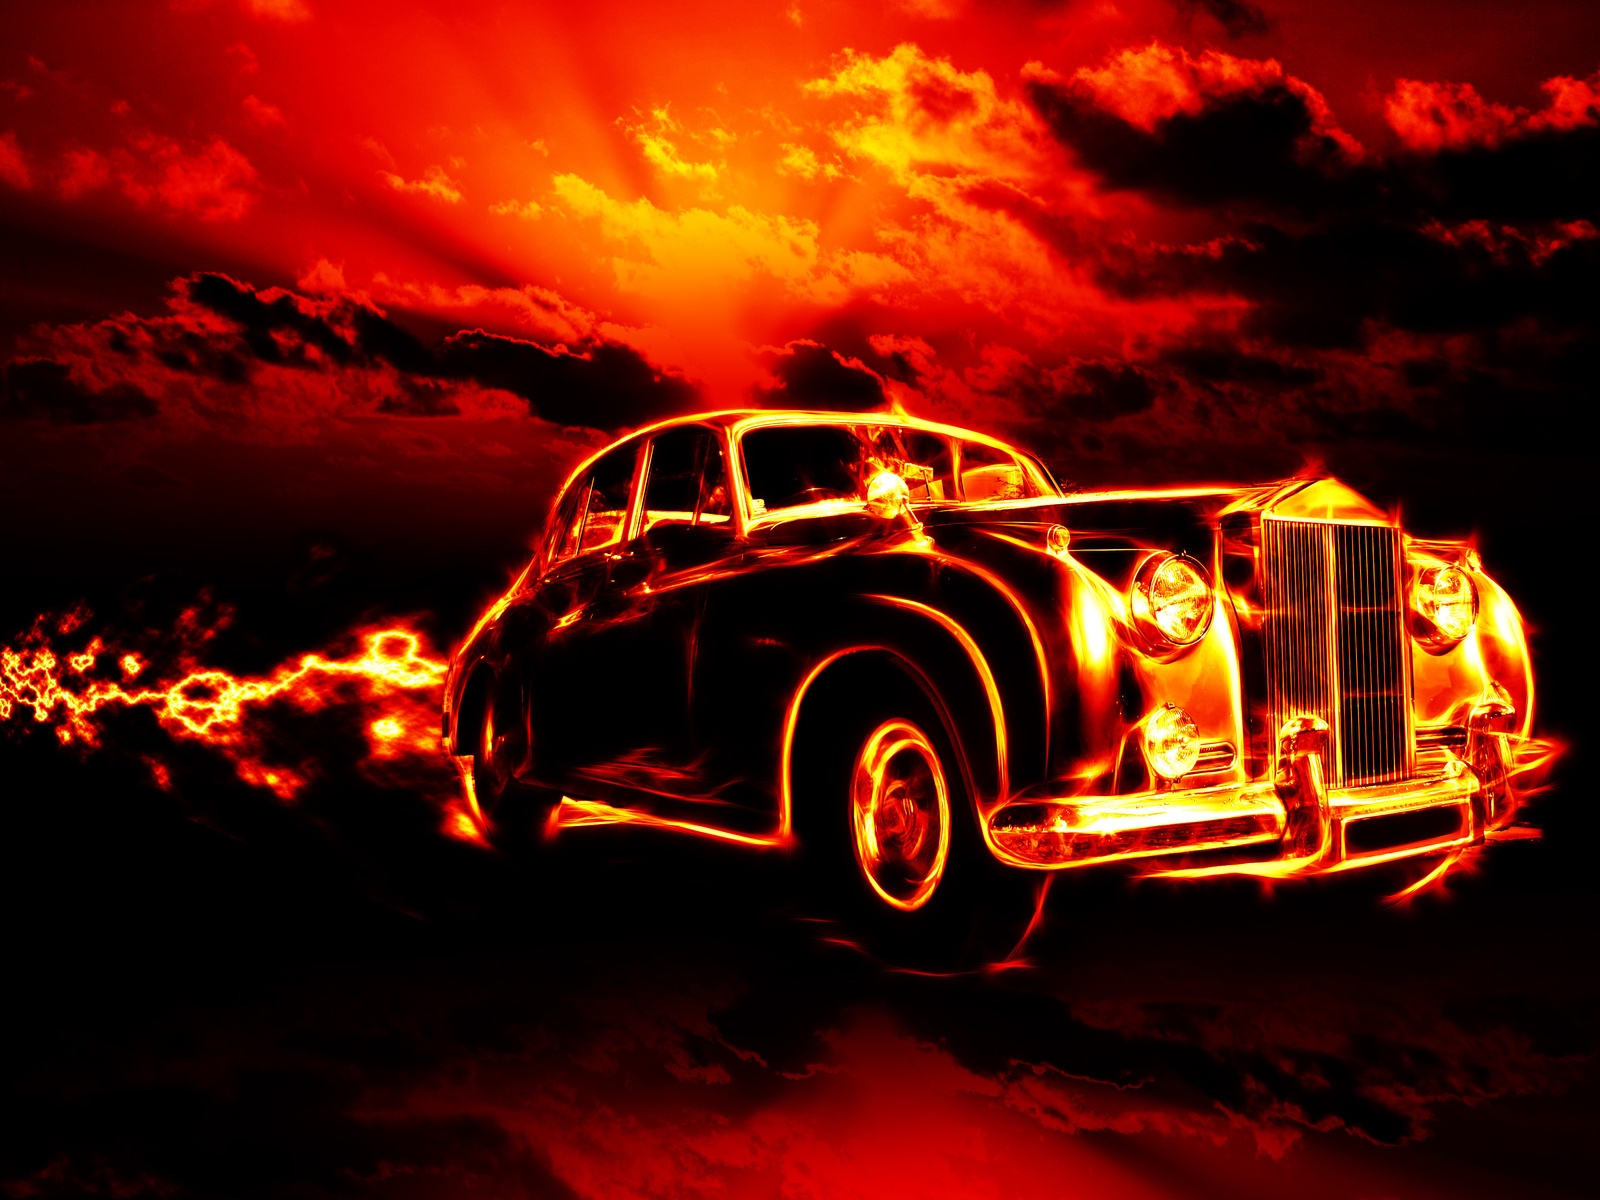 Vintage Car in Fire for 1600 x 1200 resolution